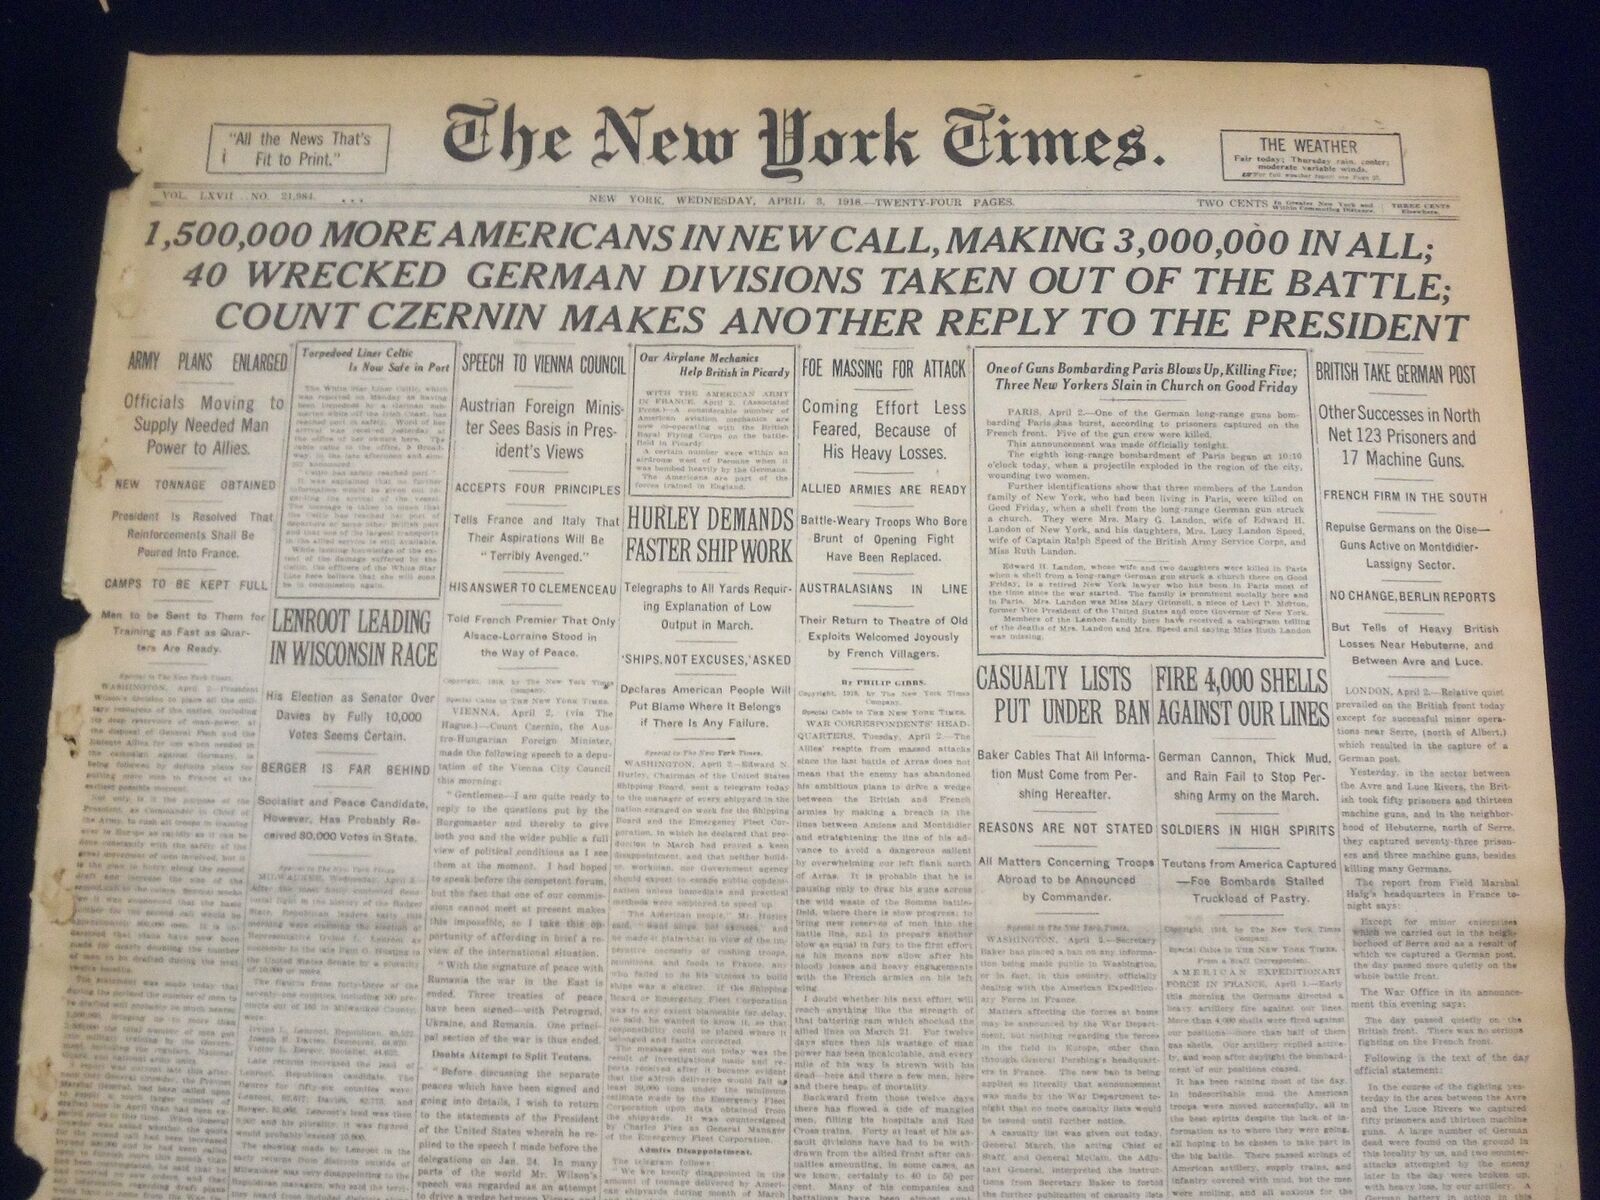 1918 APRIL 3 NEW YORK TIMES - 1,500,000 MORE AMERICANS IN NEW CALL - NT 8200